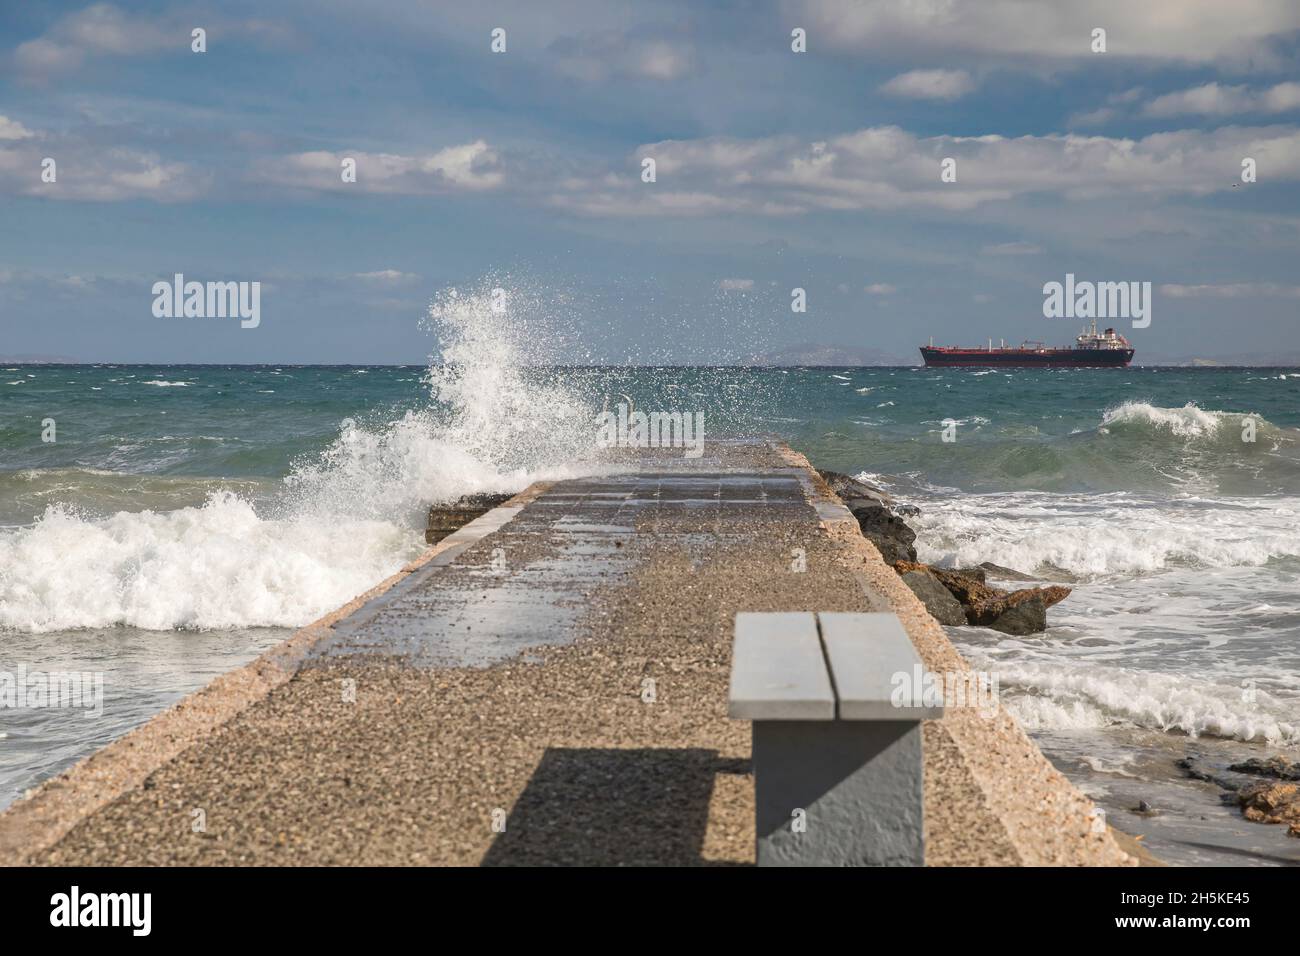 Jetty on a windy day. Cargo ship in the distance. Stock Image. Stock Photo